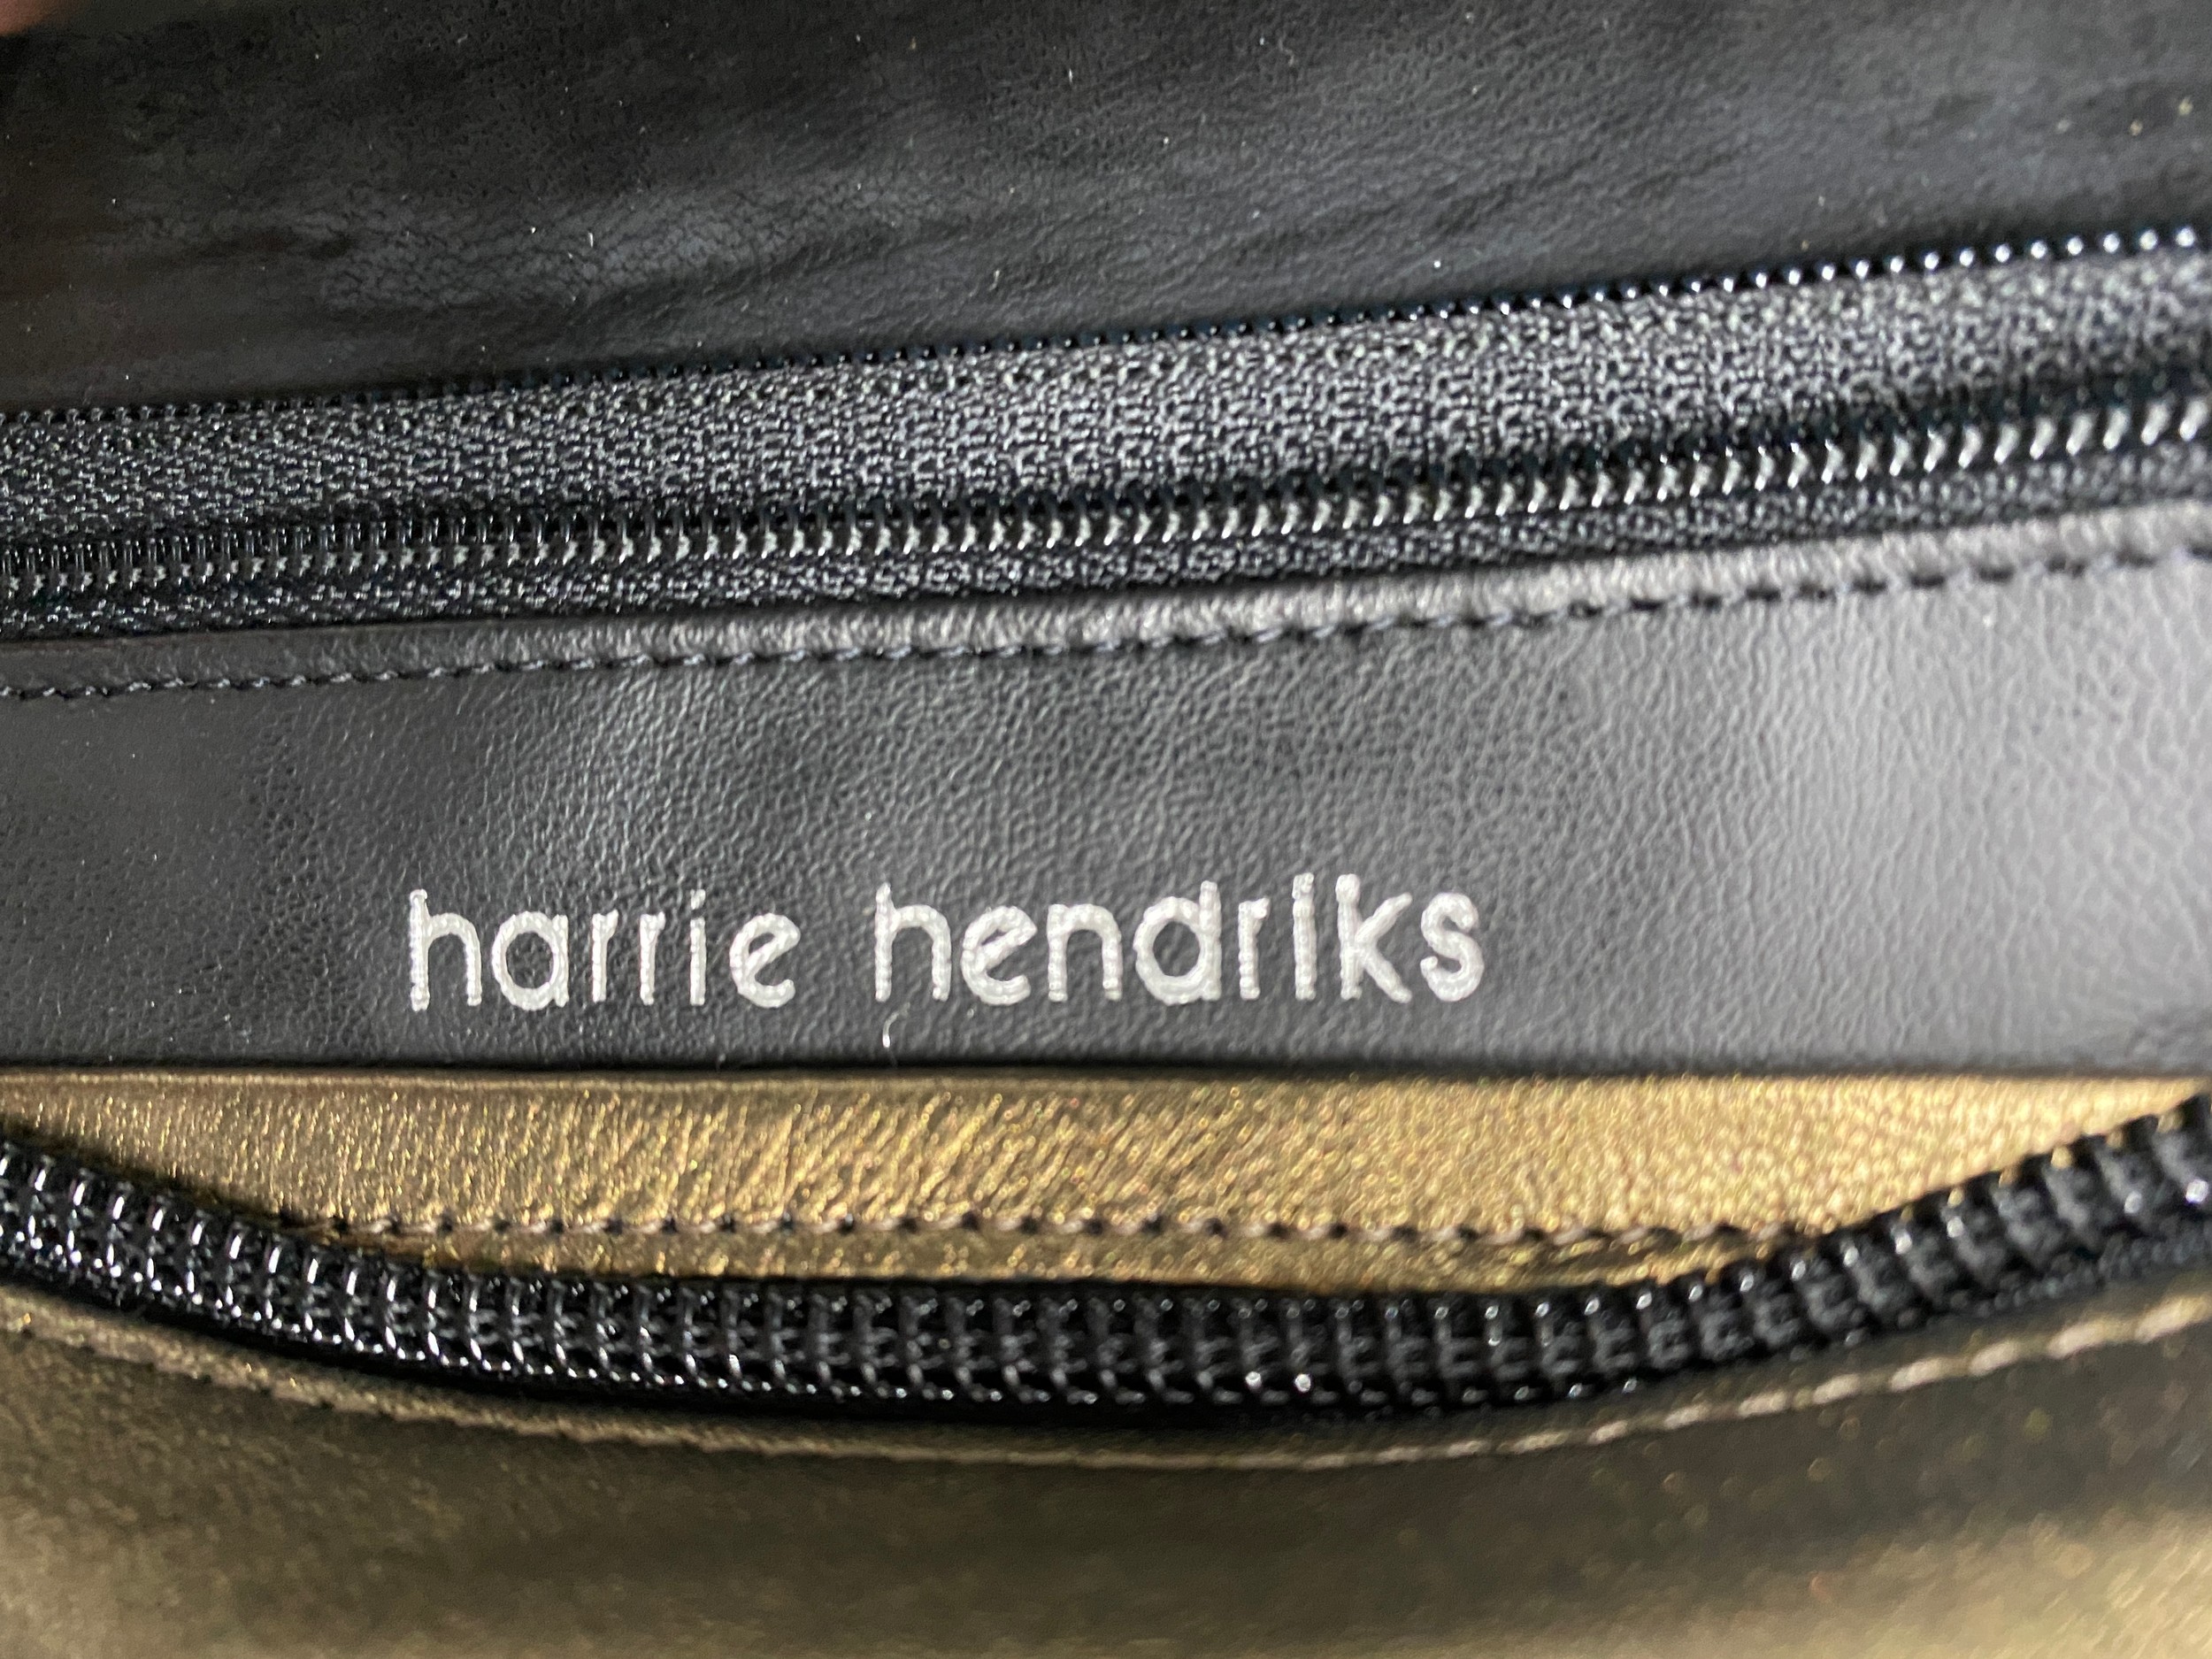 Five soft leather handbag and purses in cream tones to include a harrie hendricks one strap - Image 2 of 7